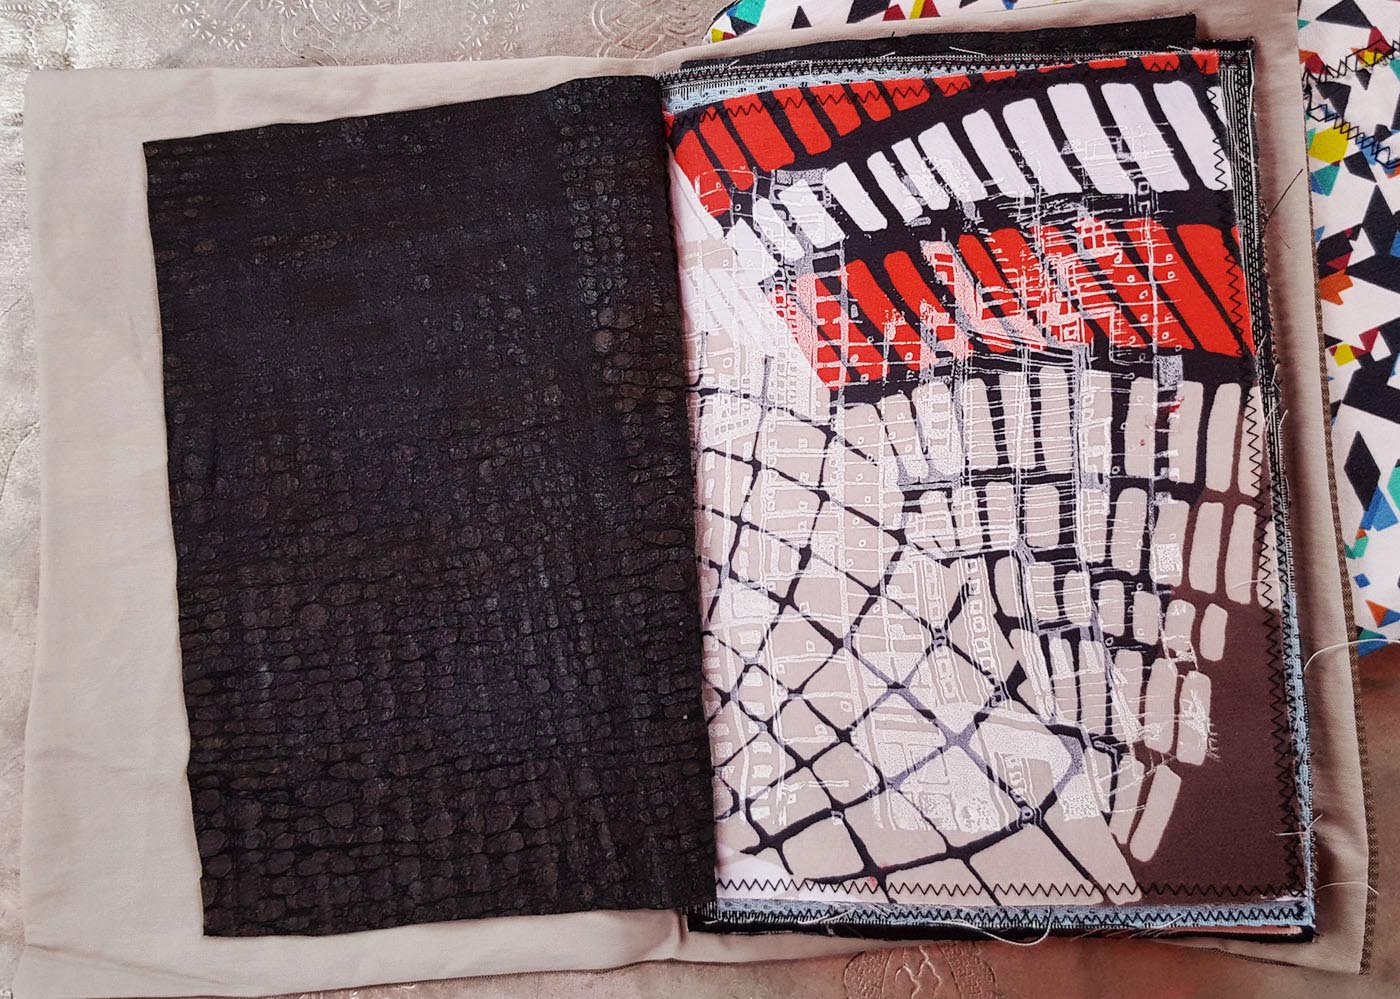 patterned swatches, textured fabric, sketchbook drawing